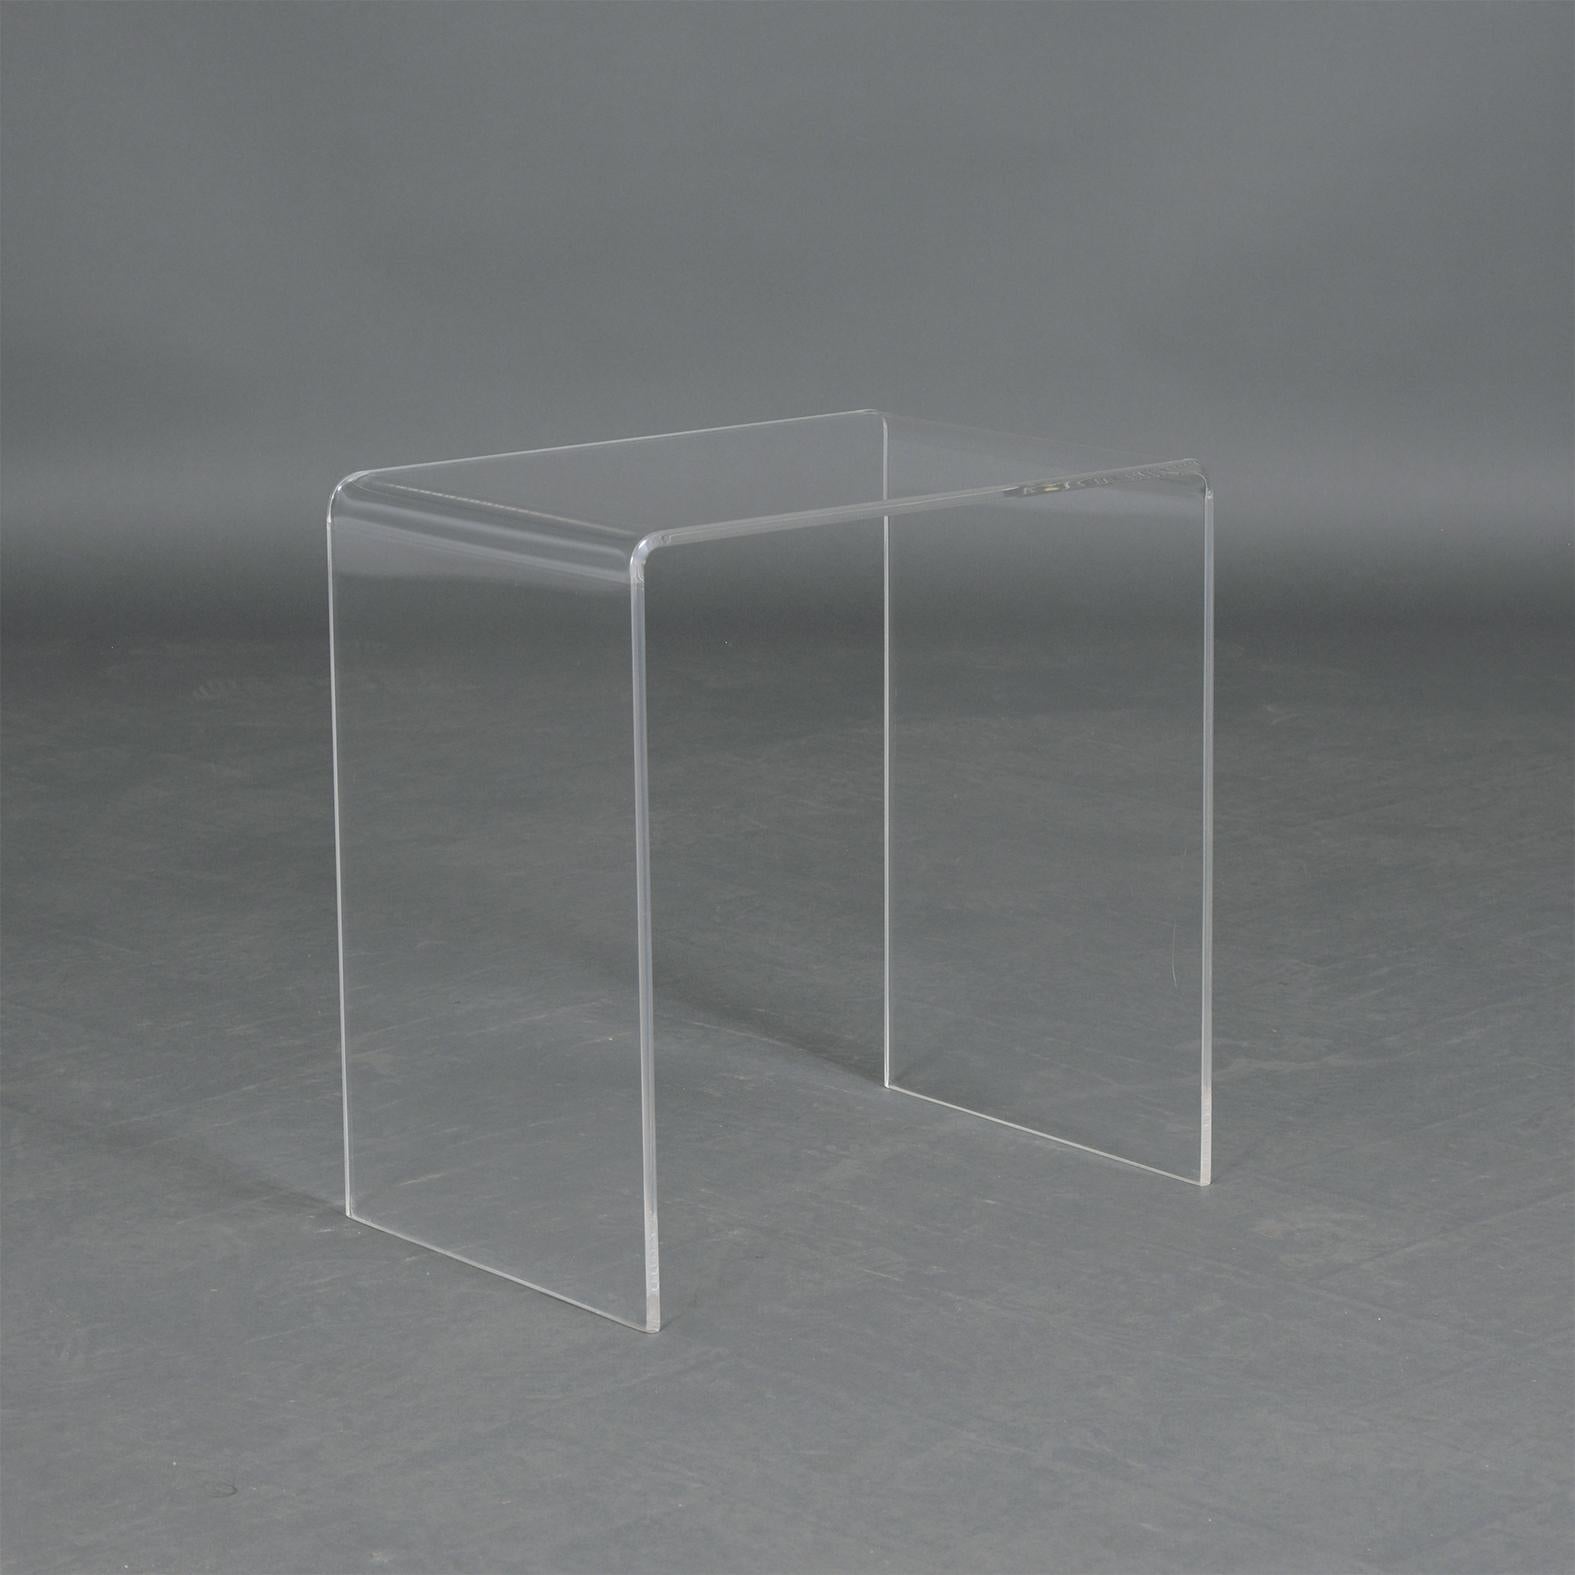 American Three Lucite Stacking Tables